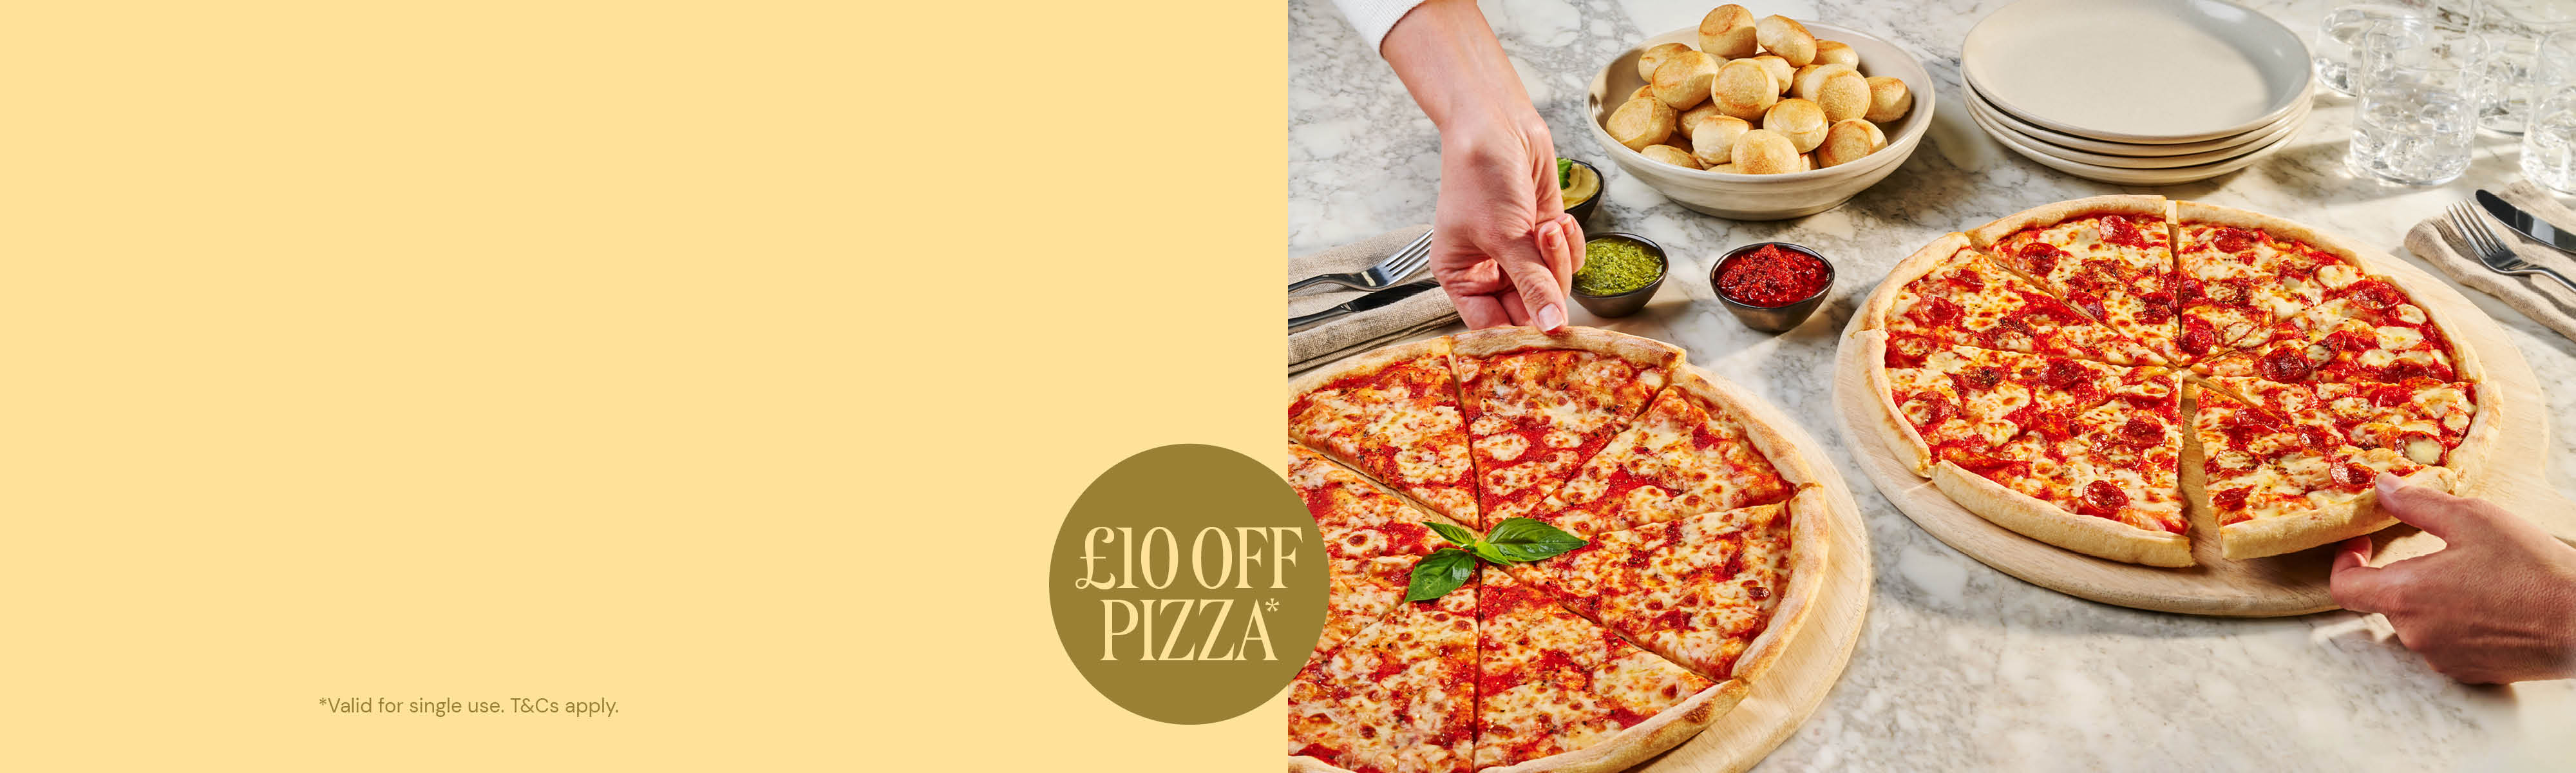 Pizza Express - Avail Up to £10 OFF